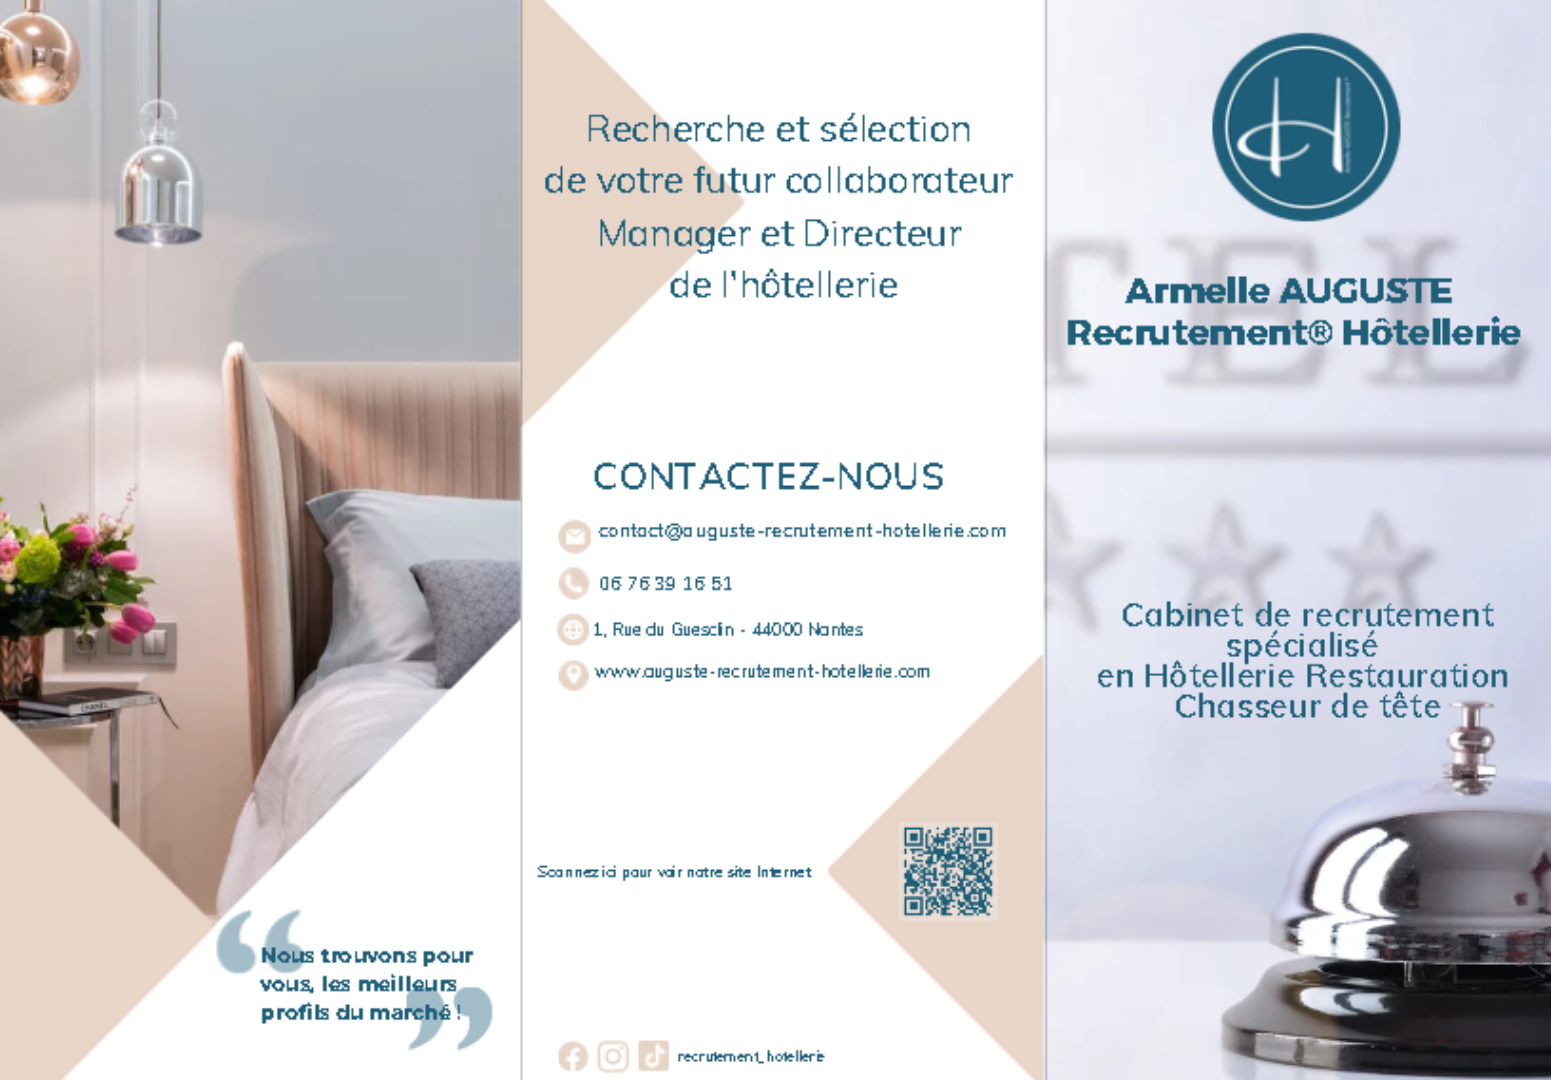 specialised recruitment in the hotel industry